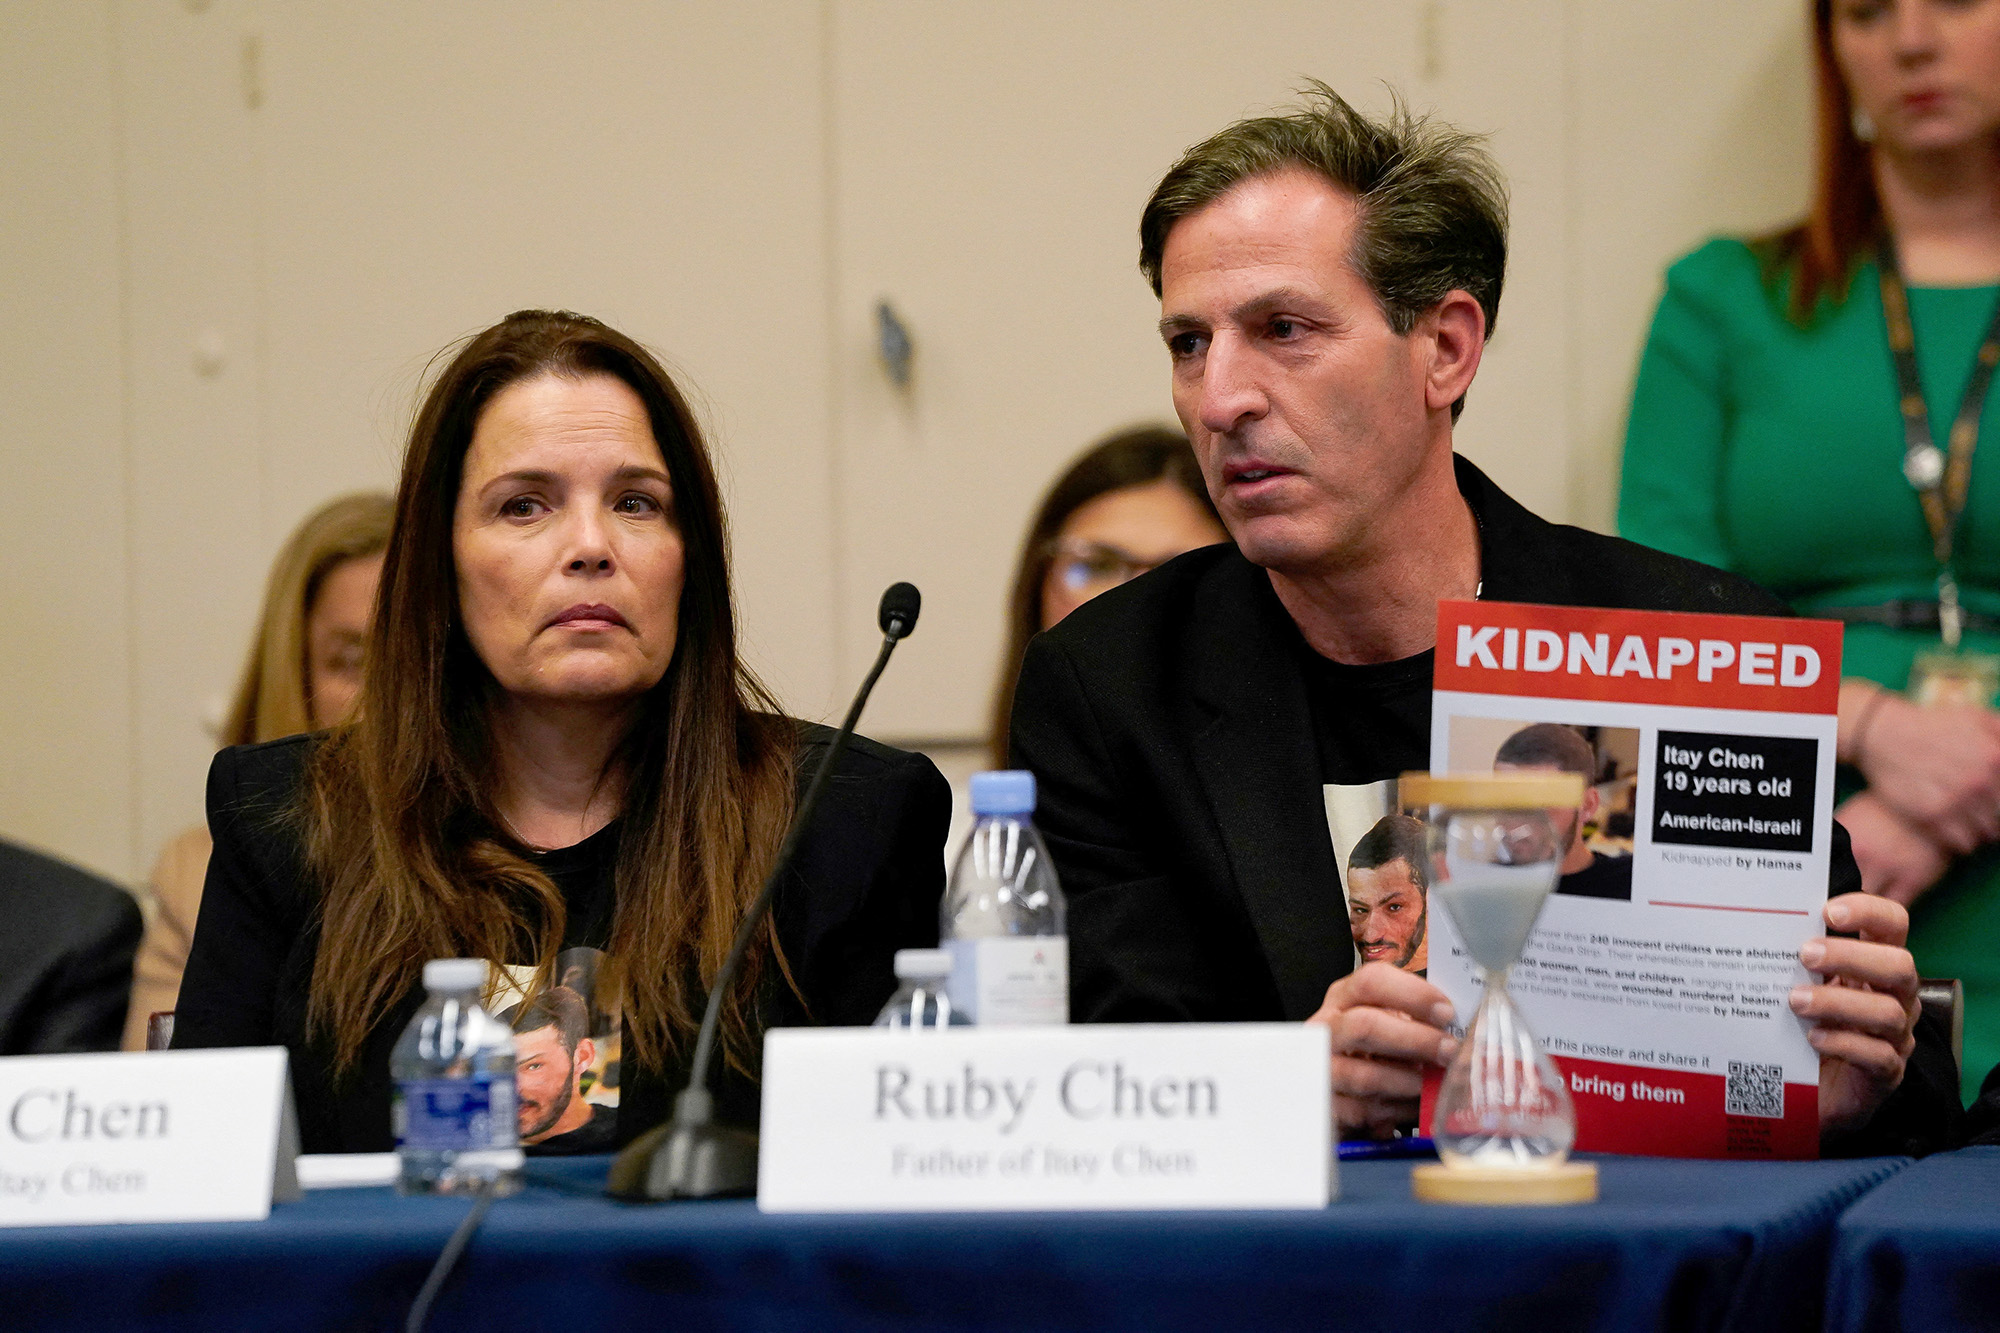 Hagit and Ruby Chen, parents of Itay Chen, speak during a U.S. House Foreign Affairs Middle East, North Africa, and Central Asia Subcommittee roundtable discussion with family members of individuals being held hostage by Hamas, on Capitol Hill in Washington, on November 29.